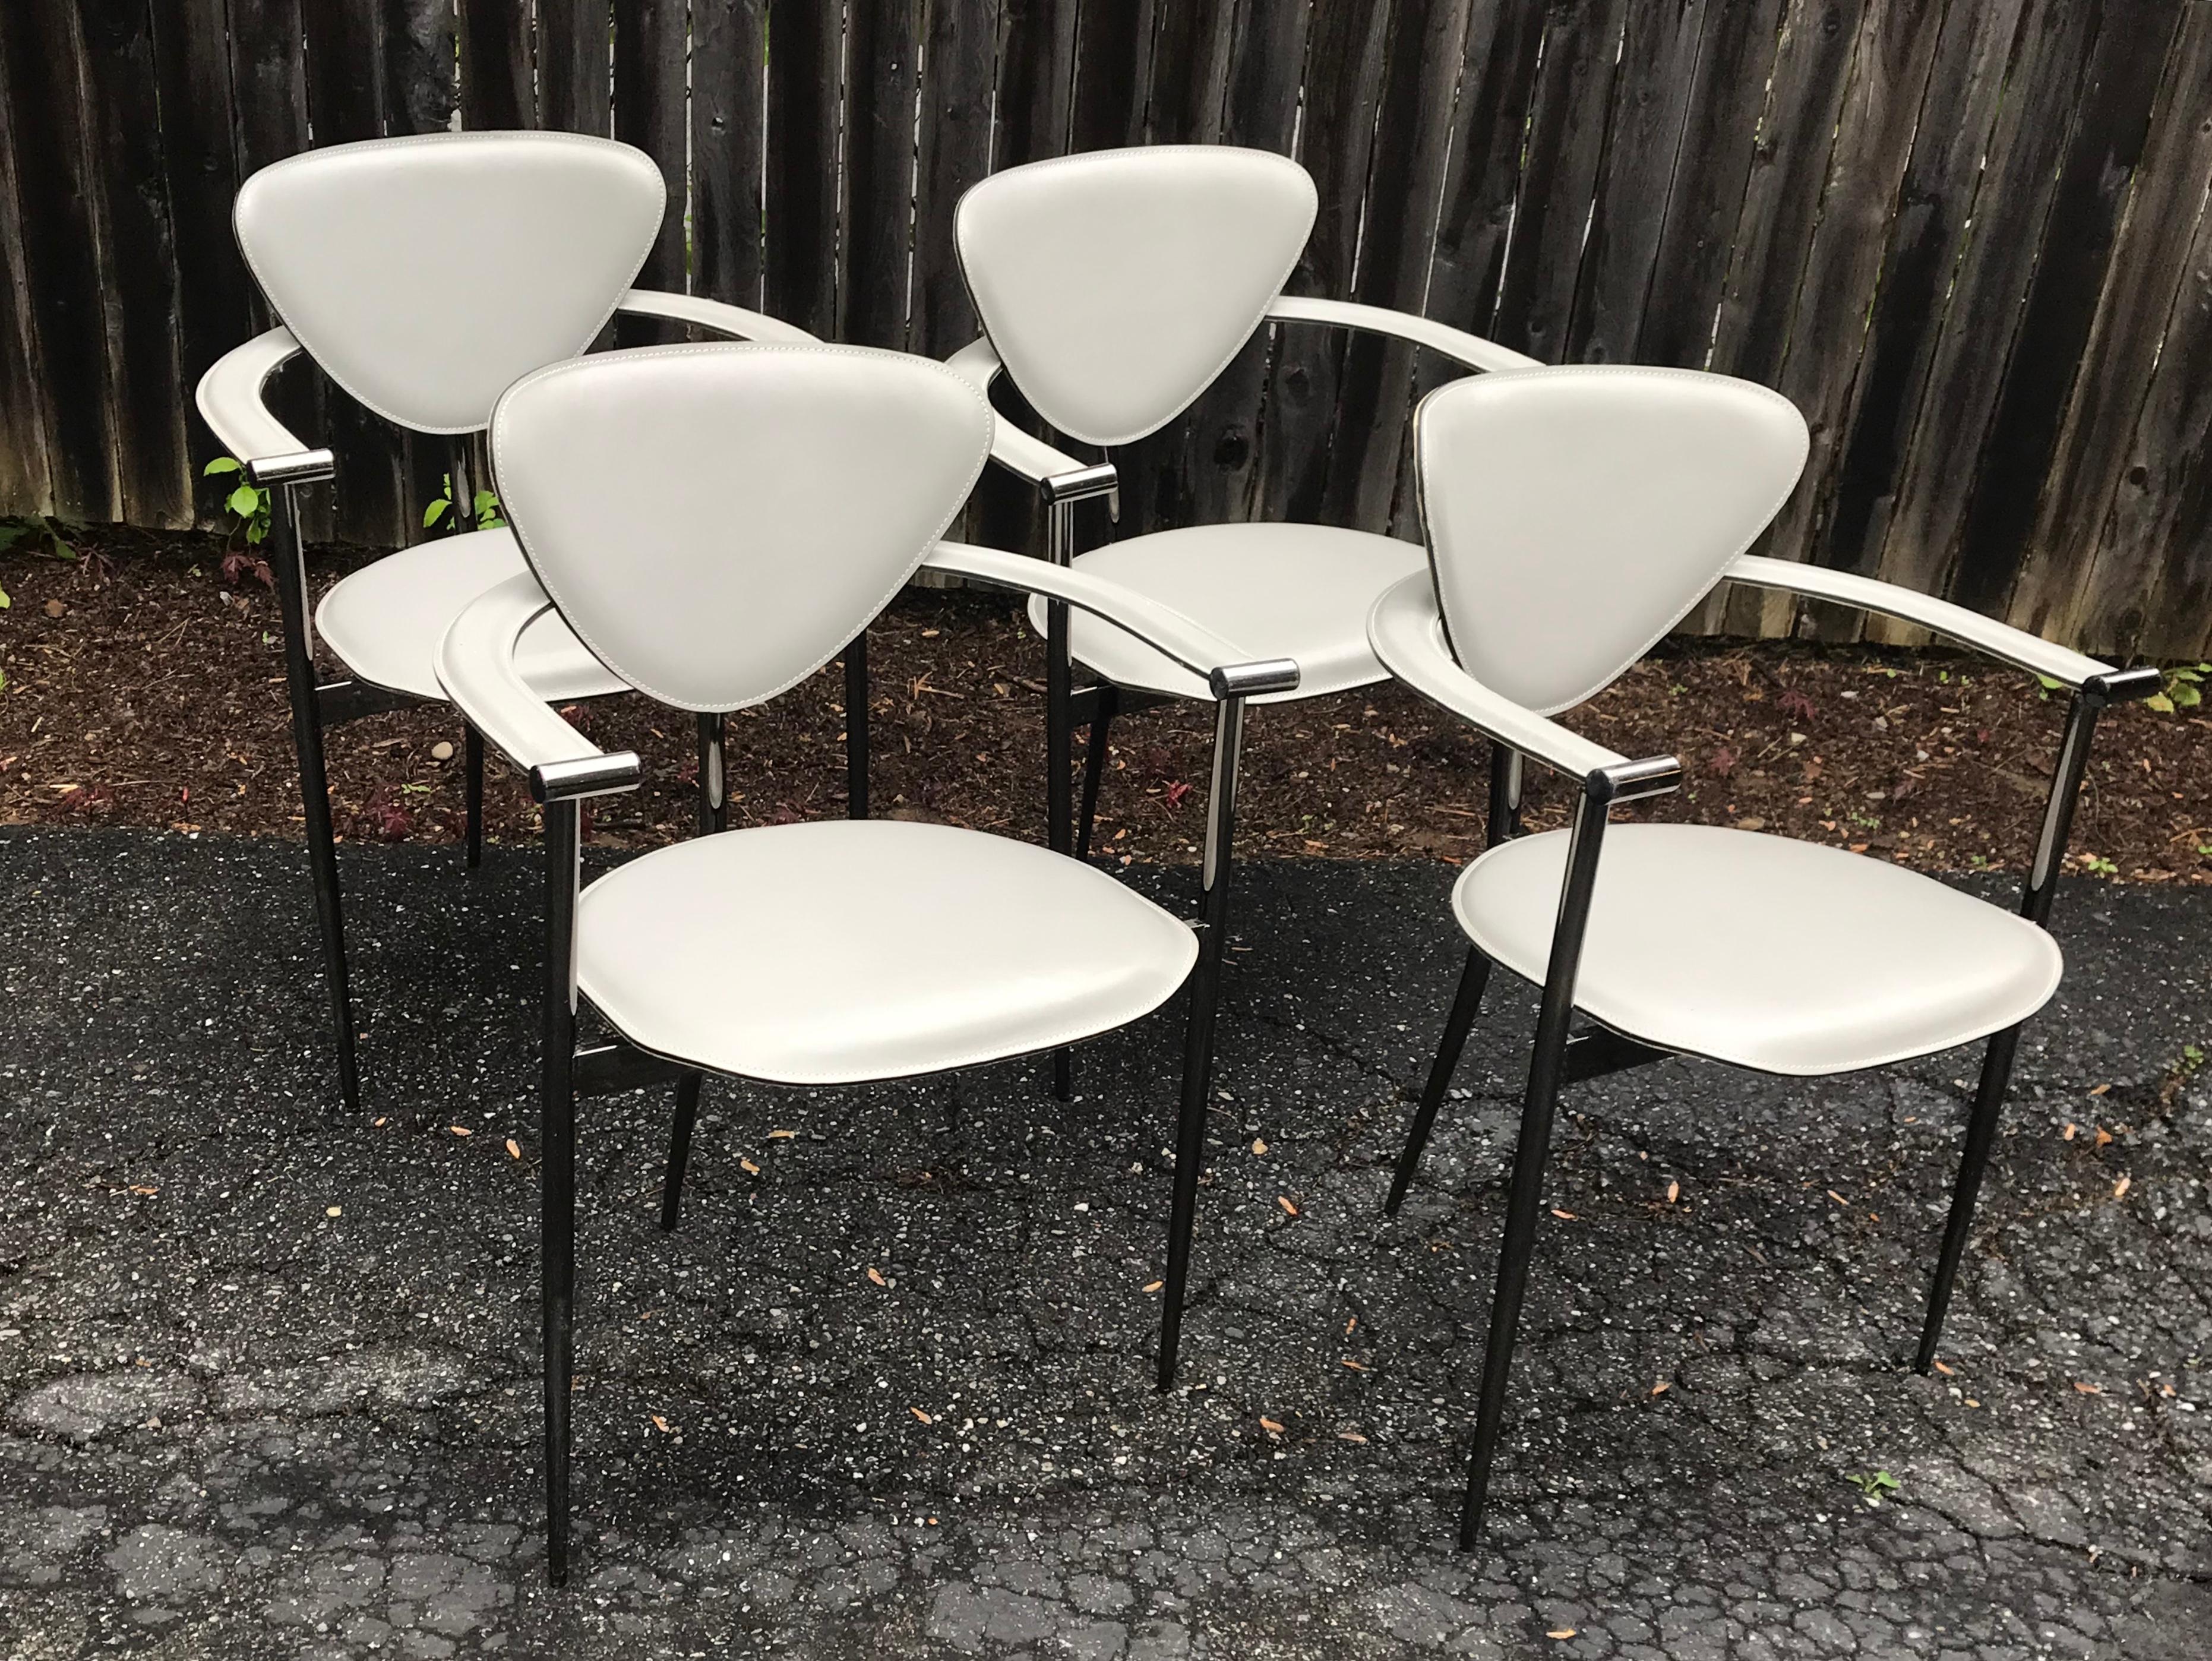 Beautiful set of four dining chairs by Arrben Italy, circa 1980s. Light gray leather seat, armrest and backrest mounted on stiletto leg smoked chrome frames. Overall good condition with minor scuffs to leather and frames, minor separation of leather